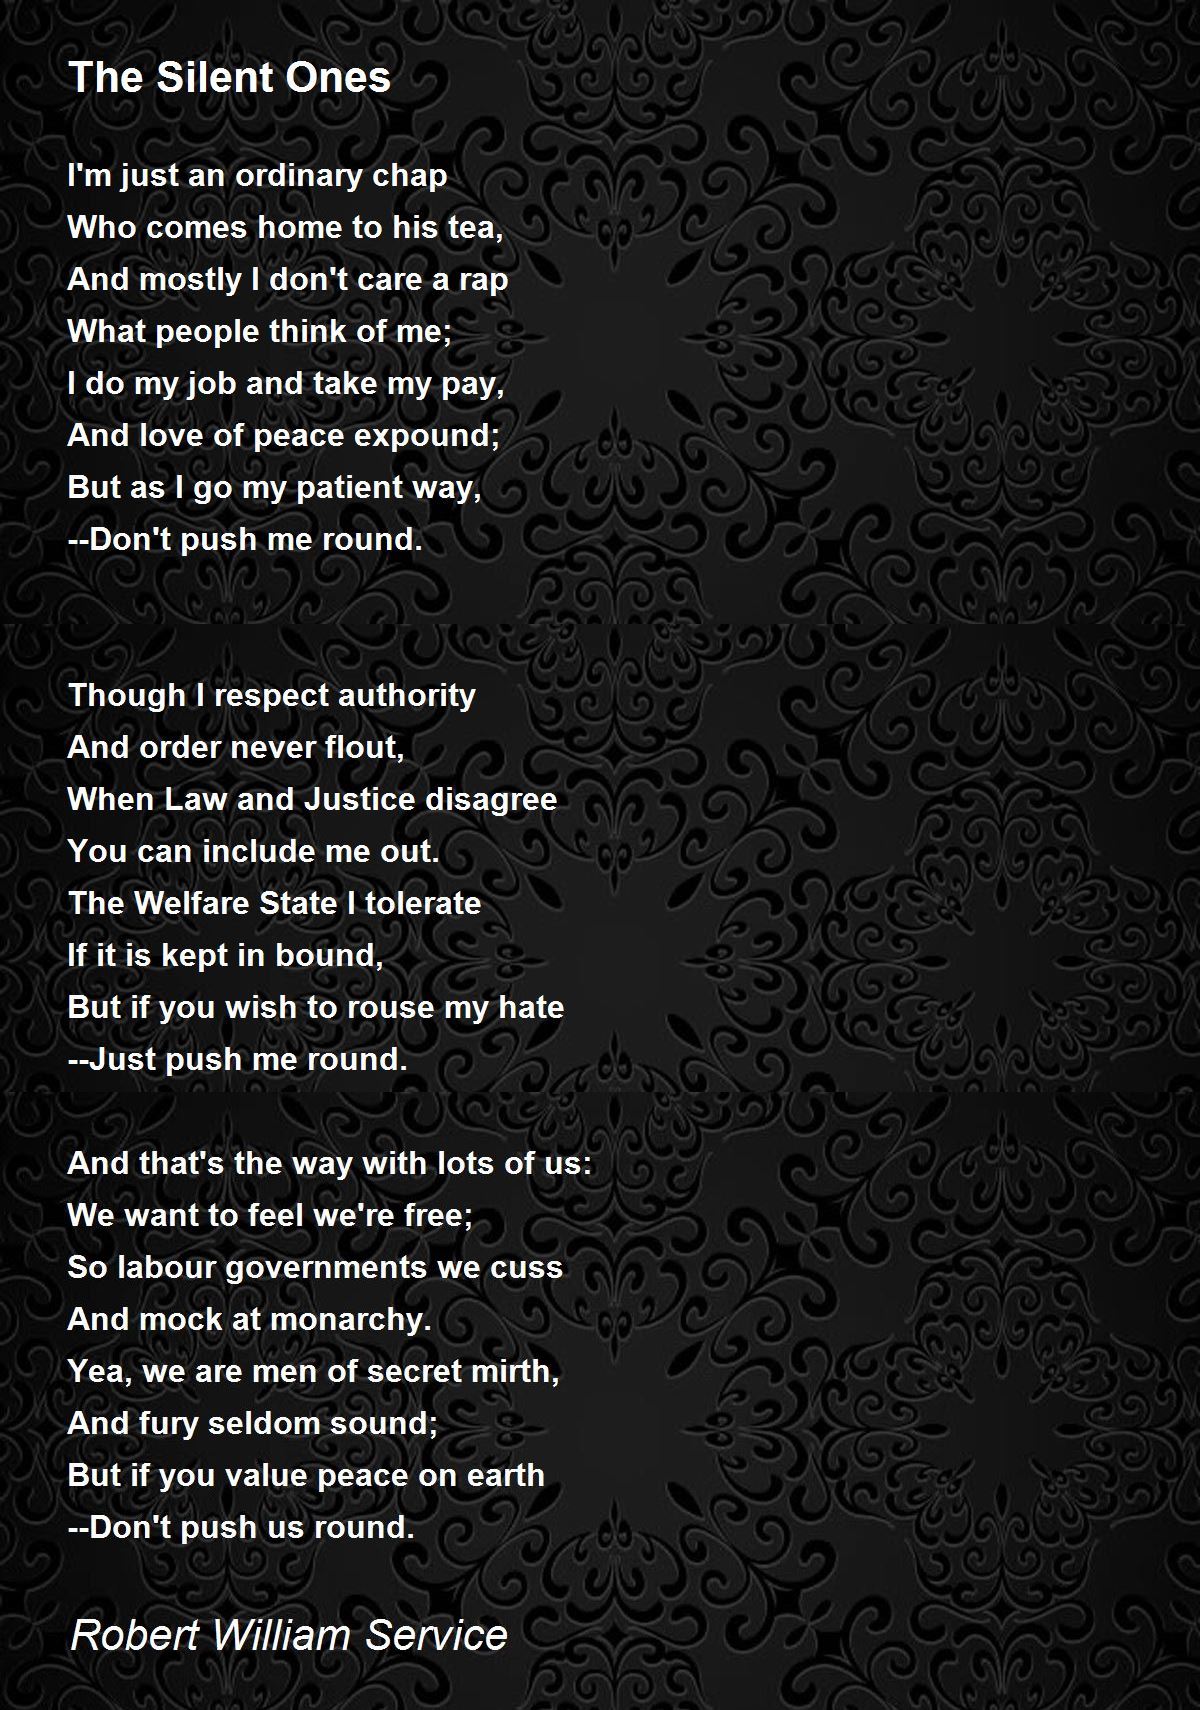 The Silent Ones - The Silent Ones Poem by Robert William Service